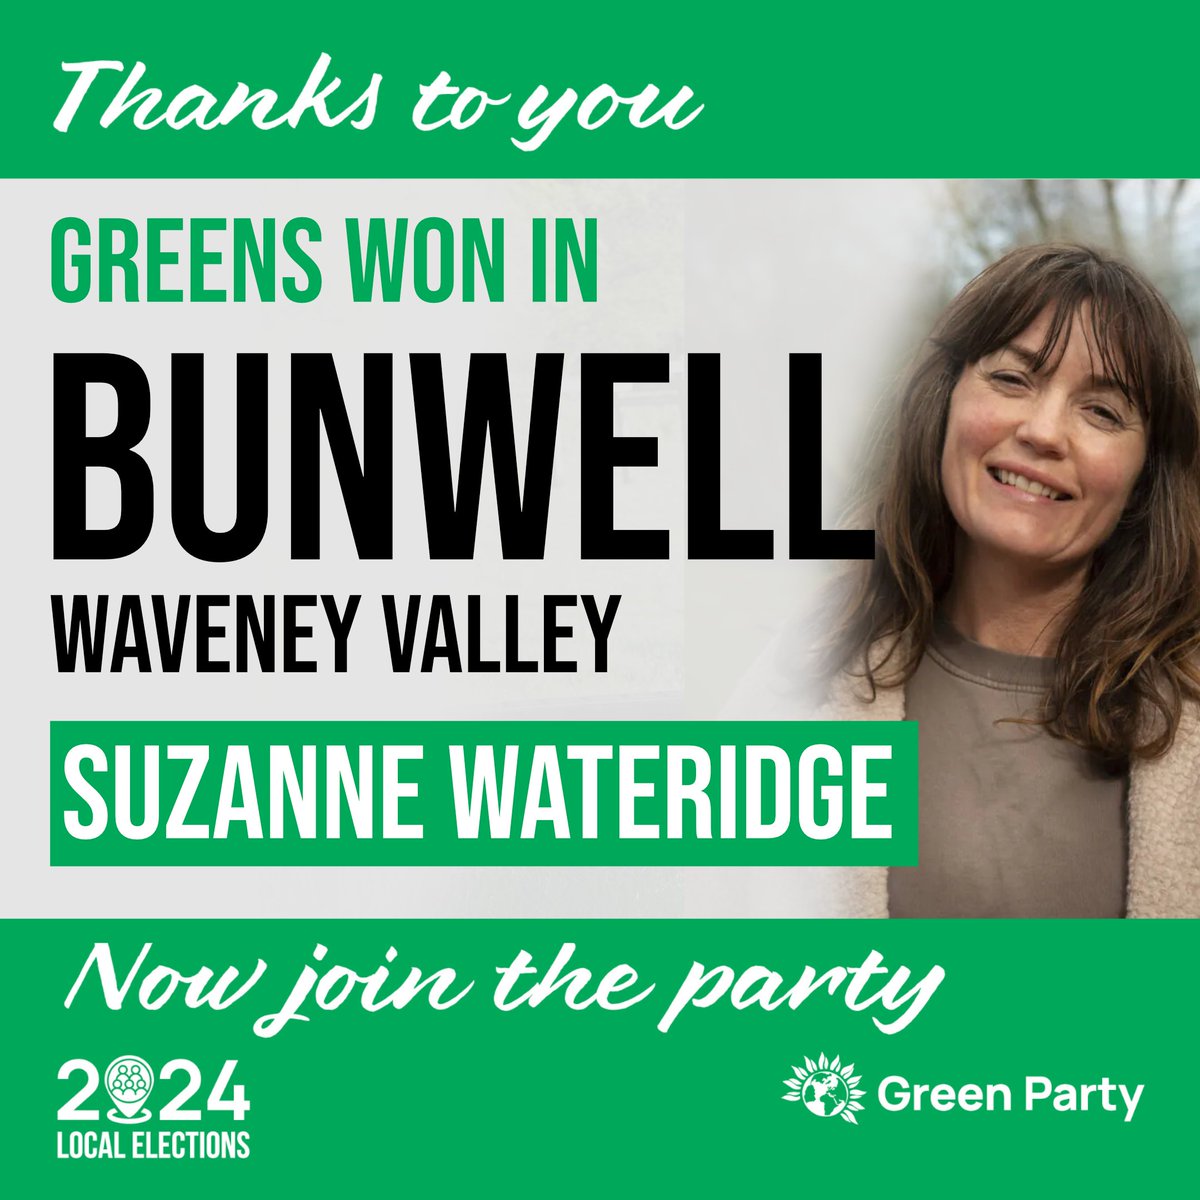 Huge congratulations to Suzanne Wateridge on winning #Bunwell for @TheGreenParty on @SNorfolkCouncil in #WaveneyValley, where @AdrianRamsay is also standing to be MP.

💚 GRN - 404, 40.5%
🔵 CON - 394, 39.5%
🔴 LAB - 131, 13.1%
🟠 LD - 68, 6.8%

#GetGreensElected